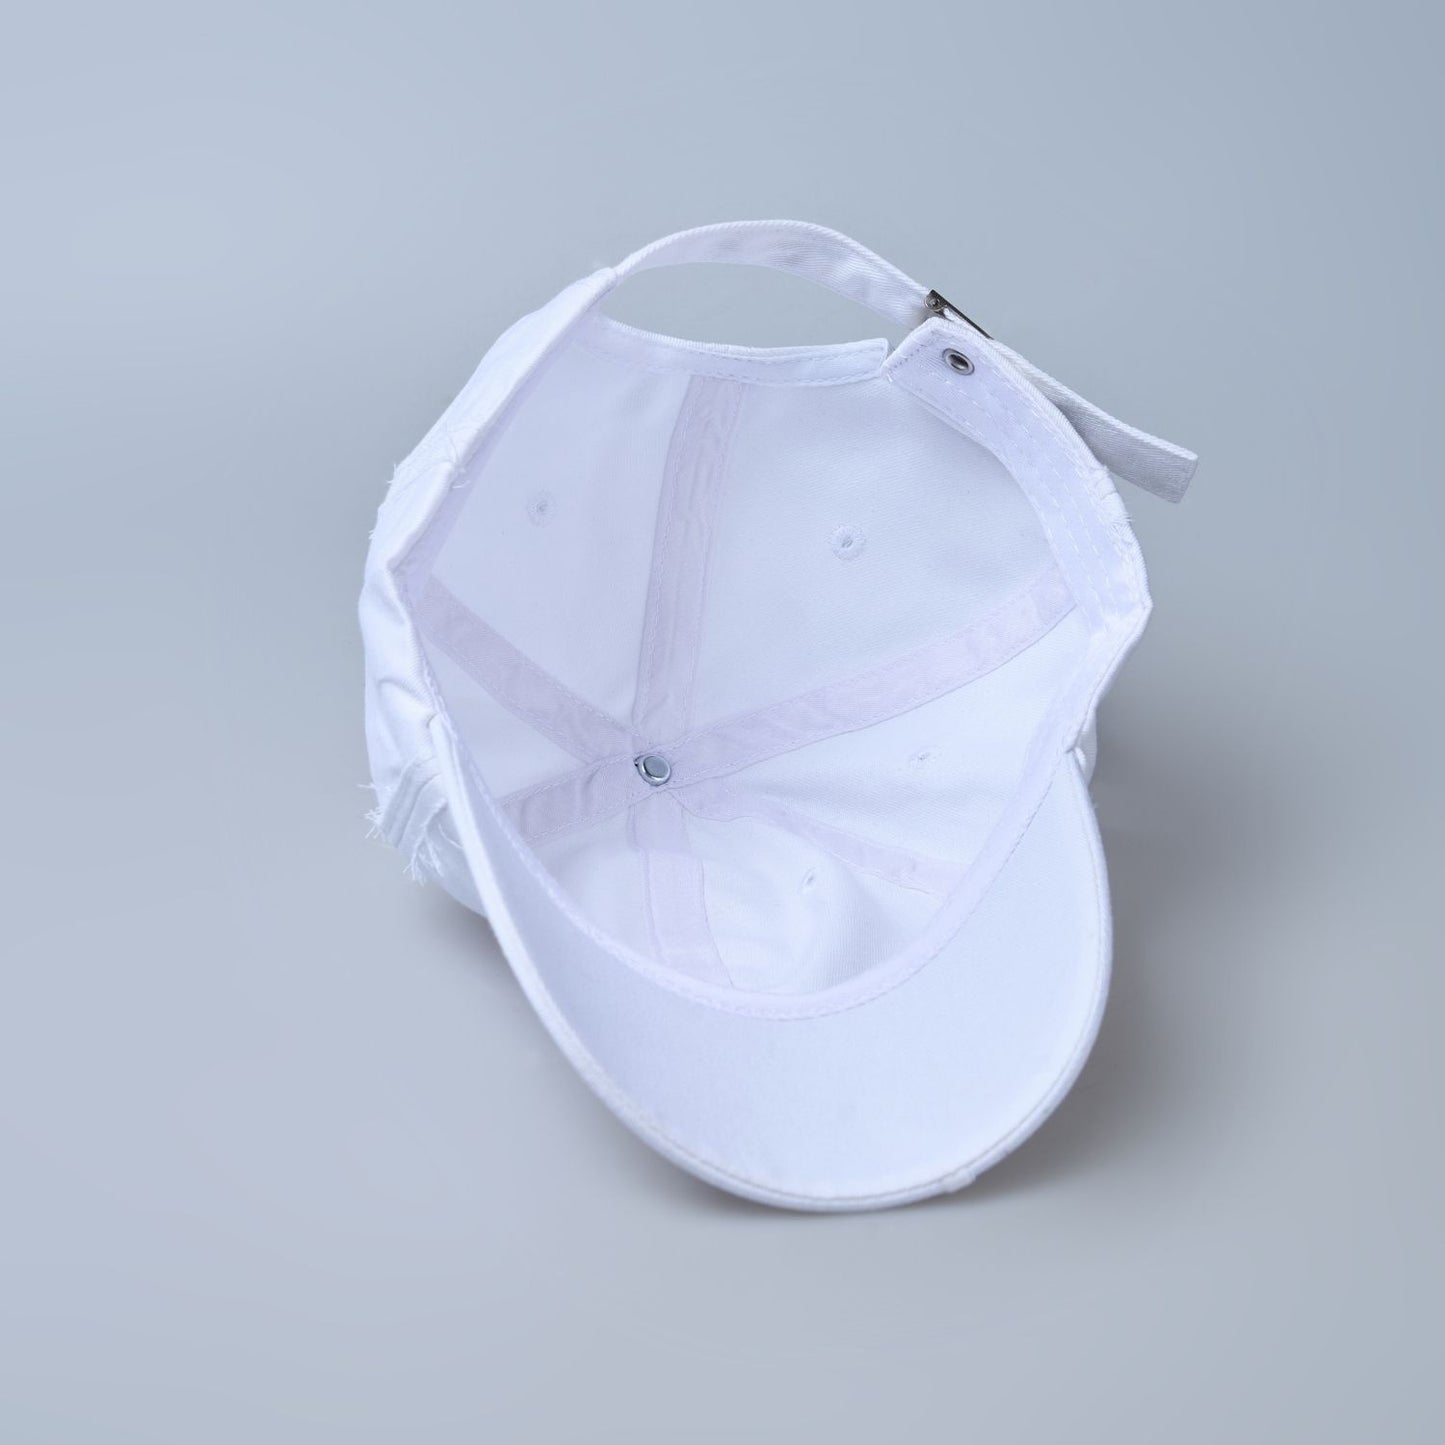 white colored, wide brim polo cap for men with adjustable strap, inside.